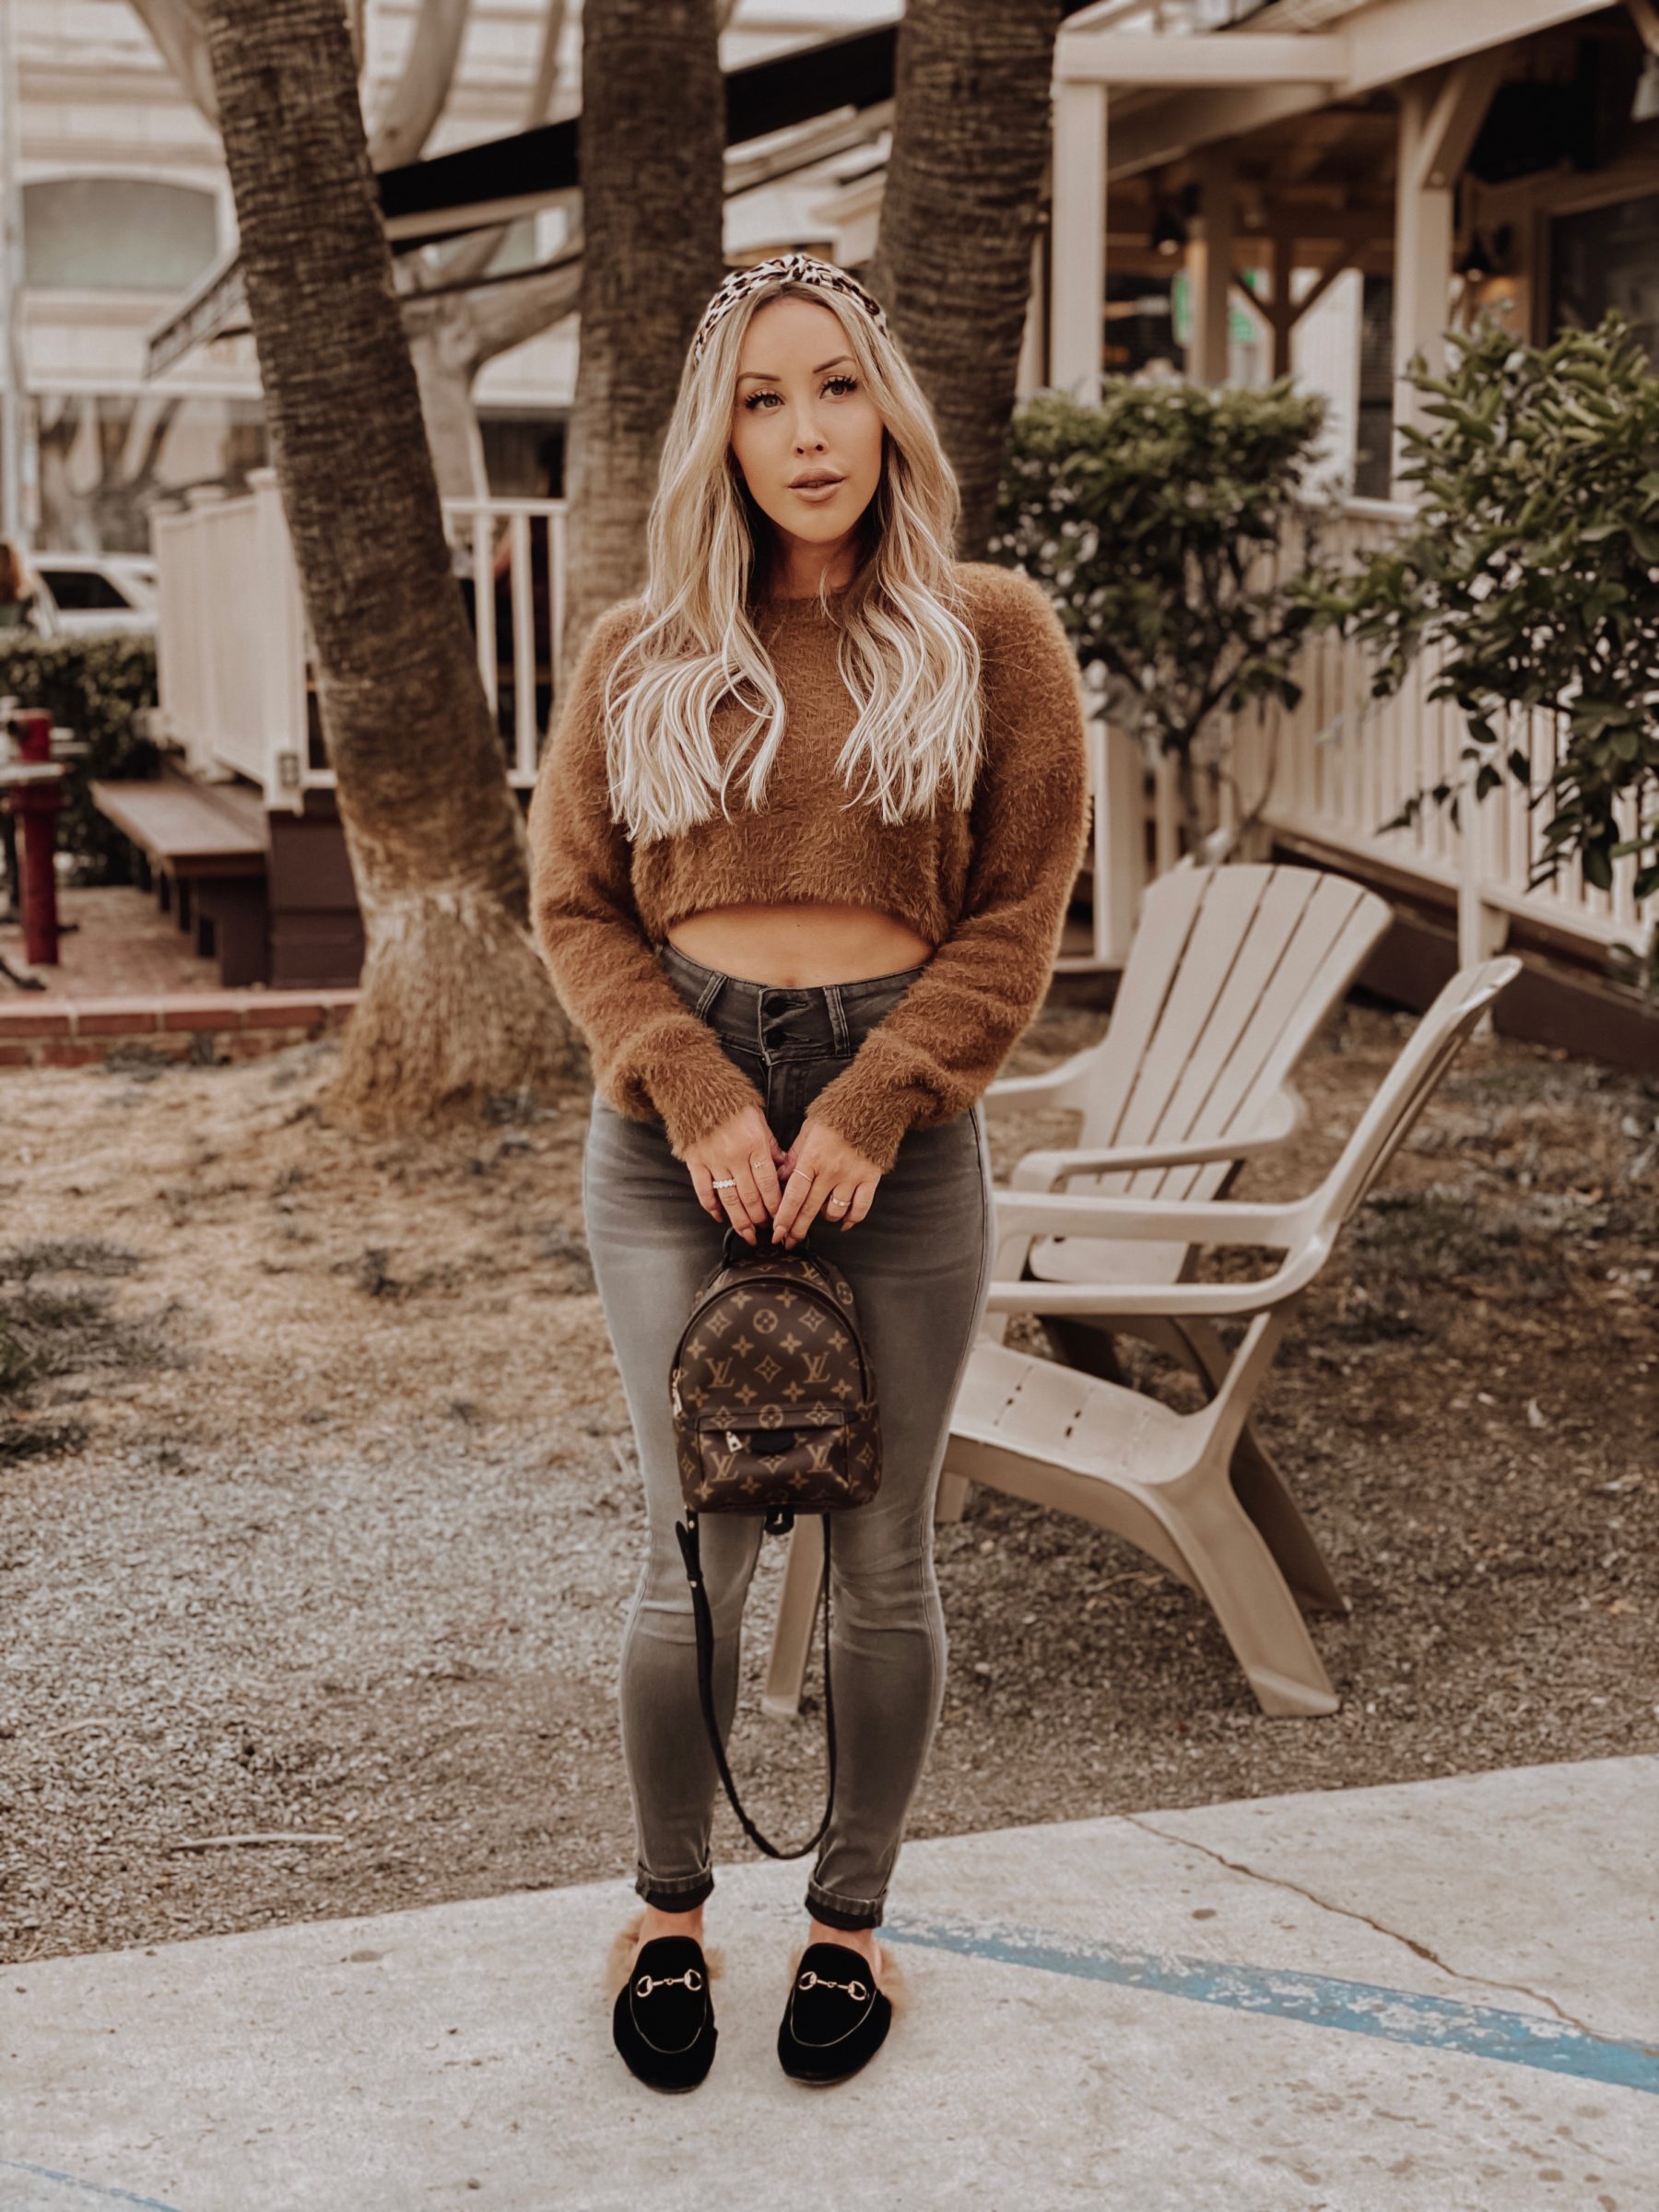 Fall Fashion | Sweater Weather | Louis Vuitton Backpack | Blondie in the City by Hayley Larue